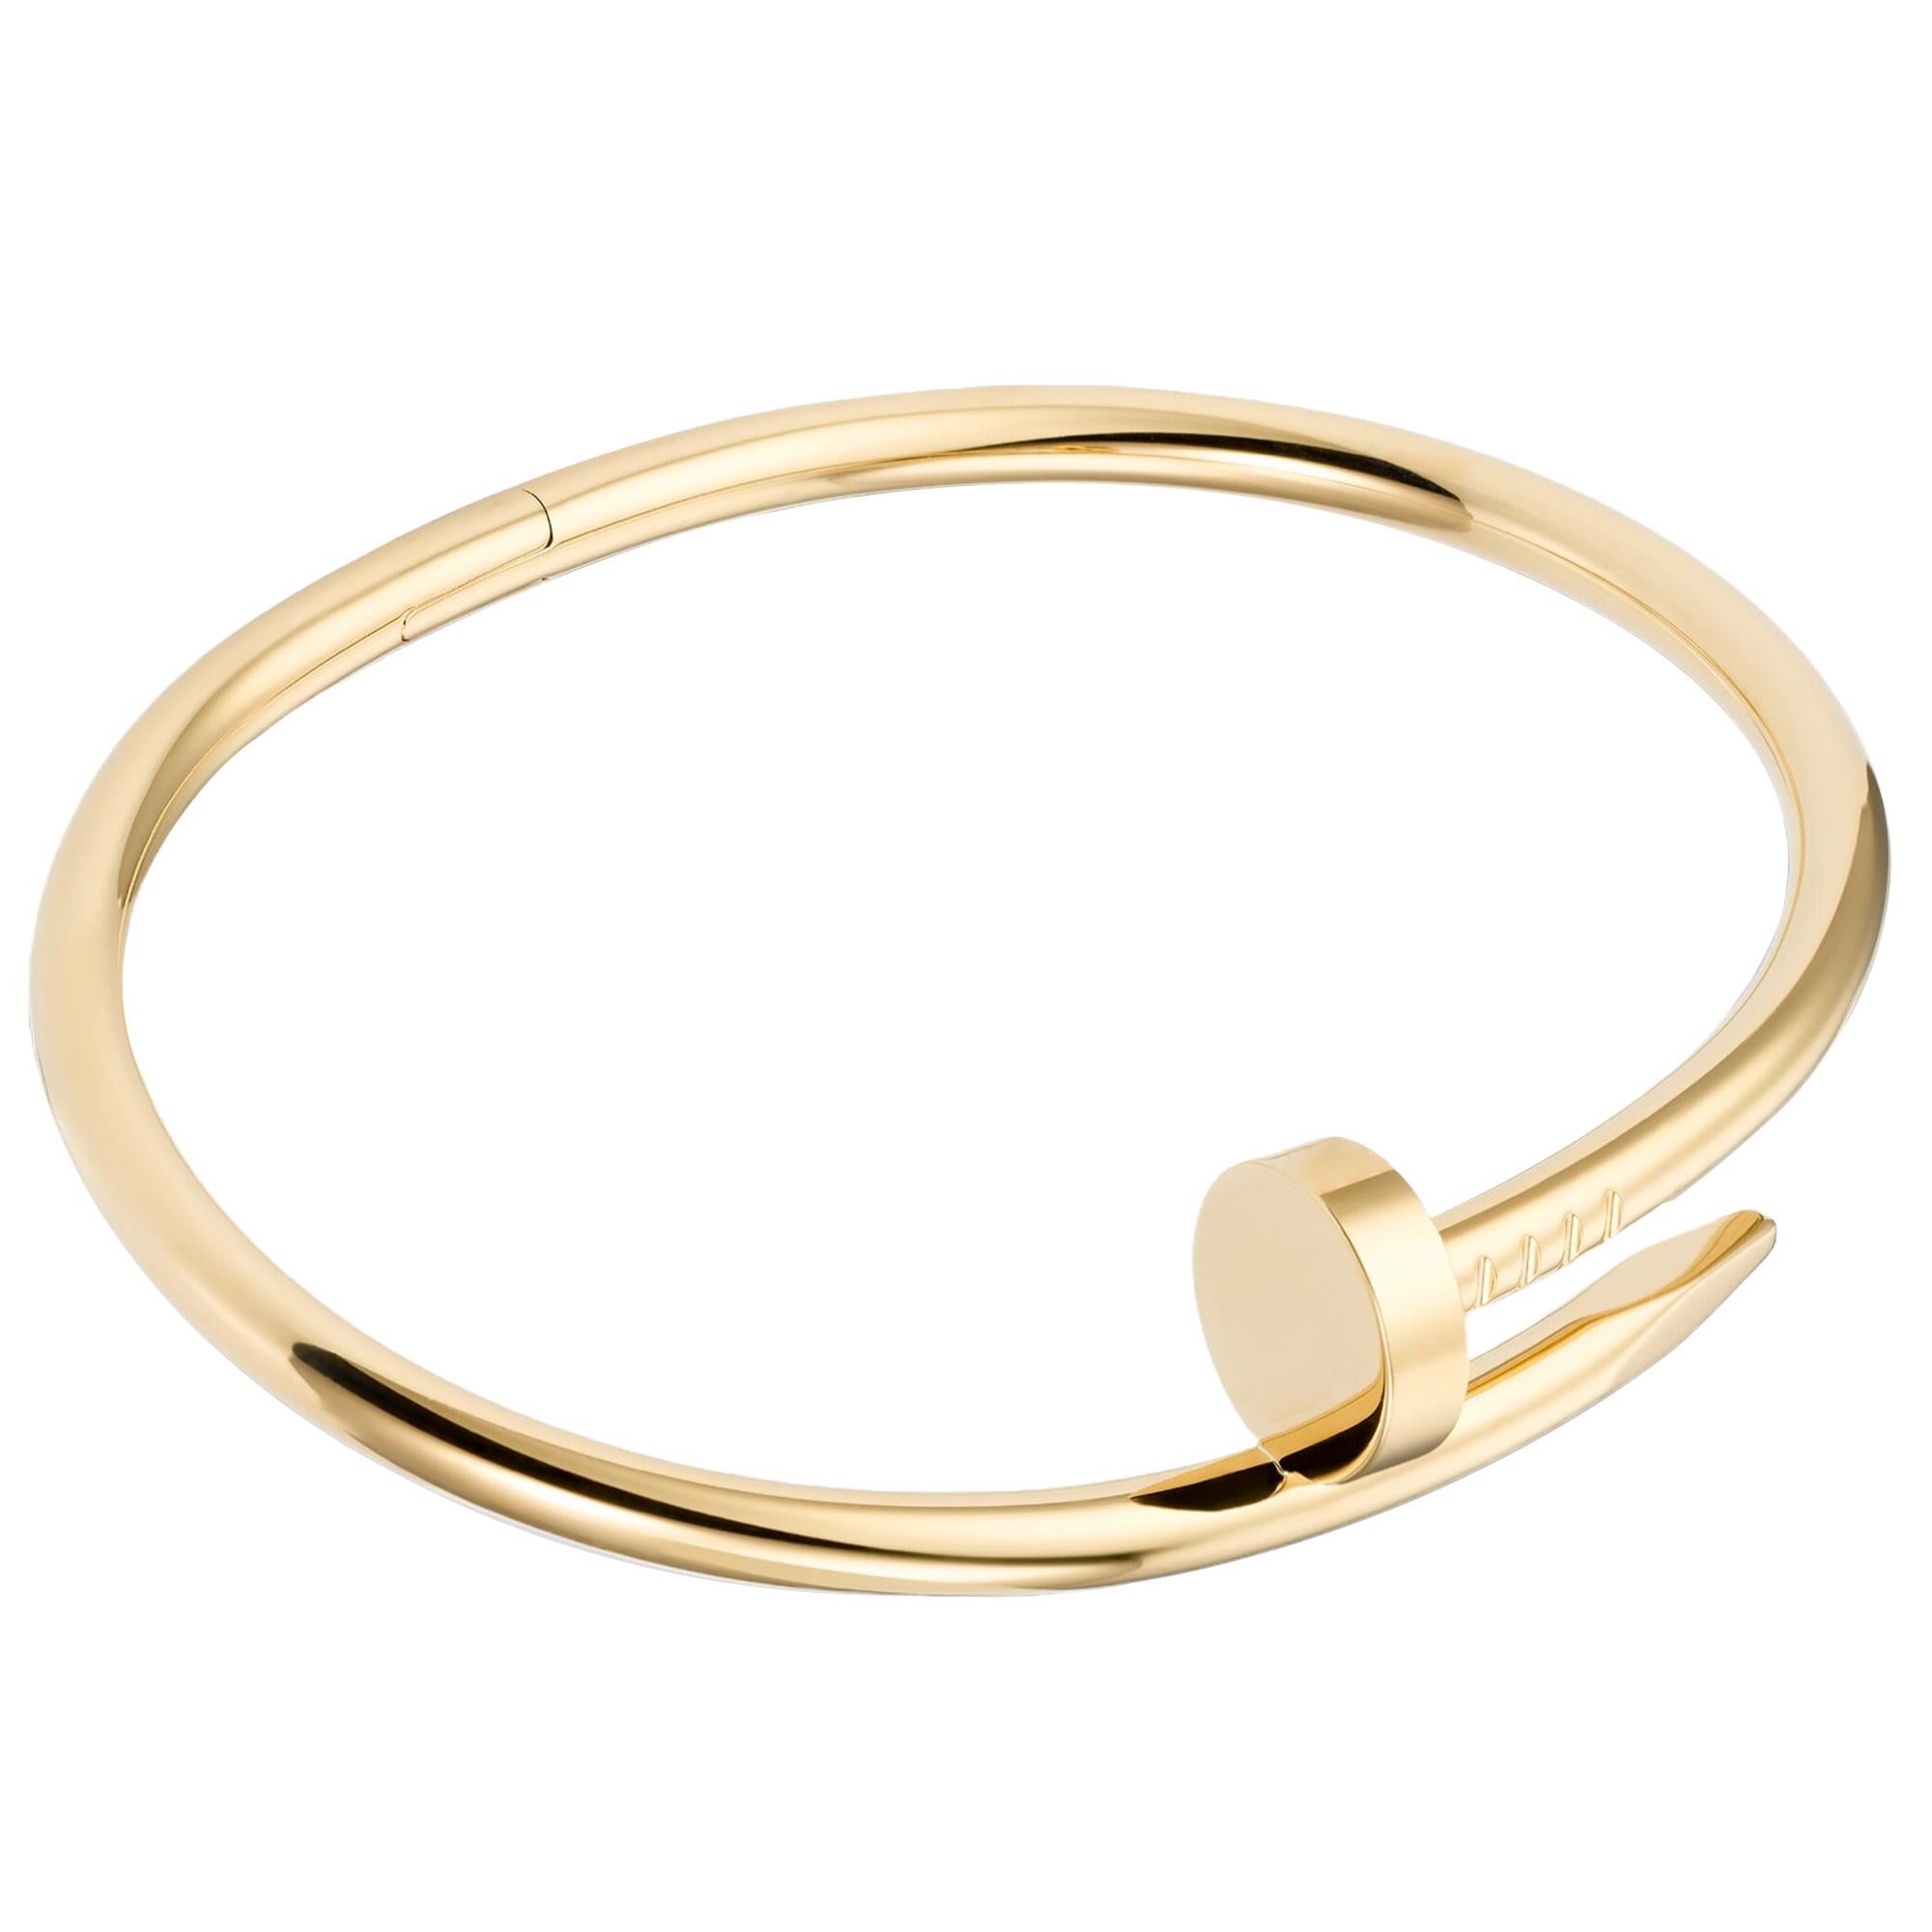 Juste un Clou bracelet, classic, 18K yellow gold (750/1000). Width: 3.5 mm (for size 15).

Details:
Brand: Cartier
Type: Classic Juste un Clou Bracelet
Material: Yellow Gold
Size: 21
Theme: Romantic, Love
Scope of Delivery: Box and Papers
Purchased